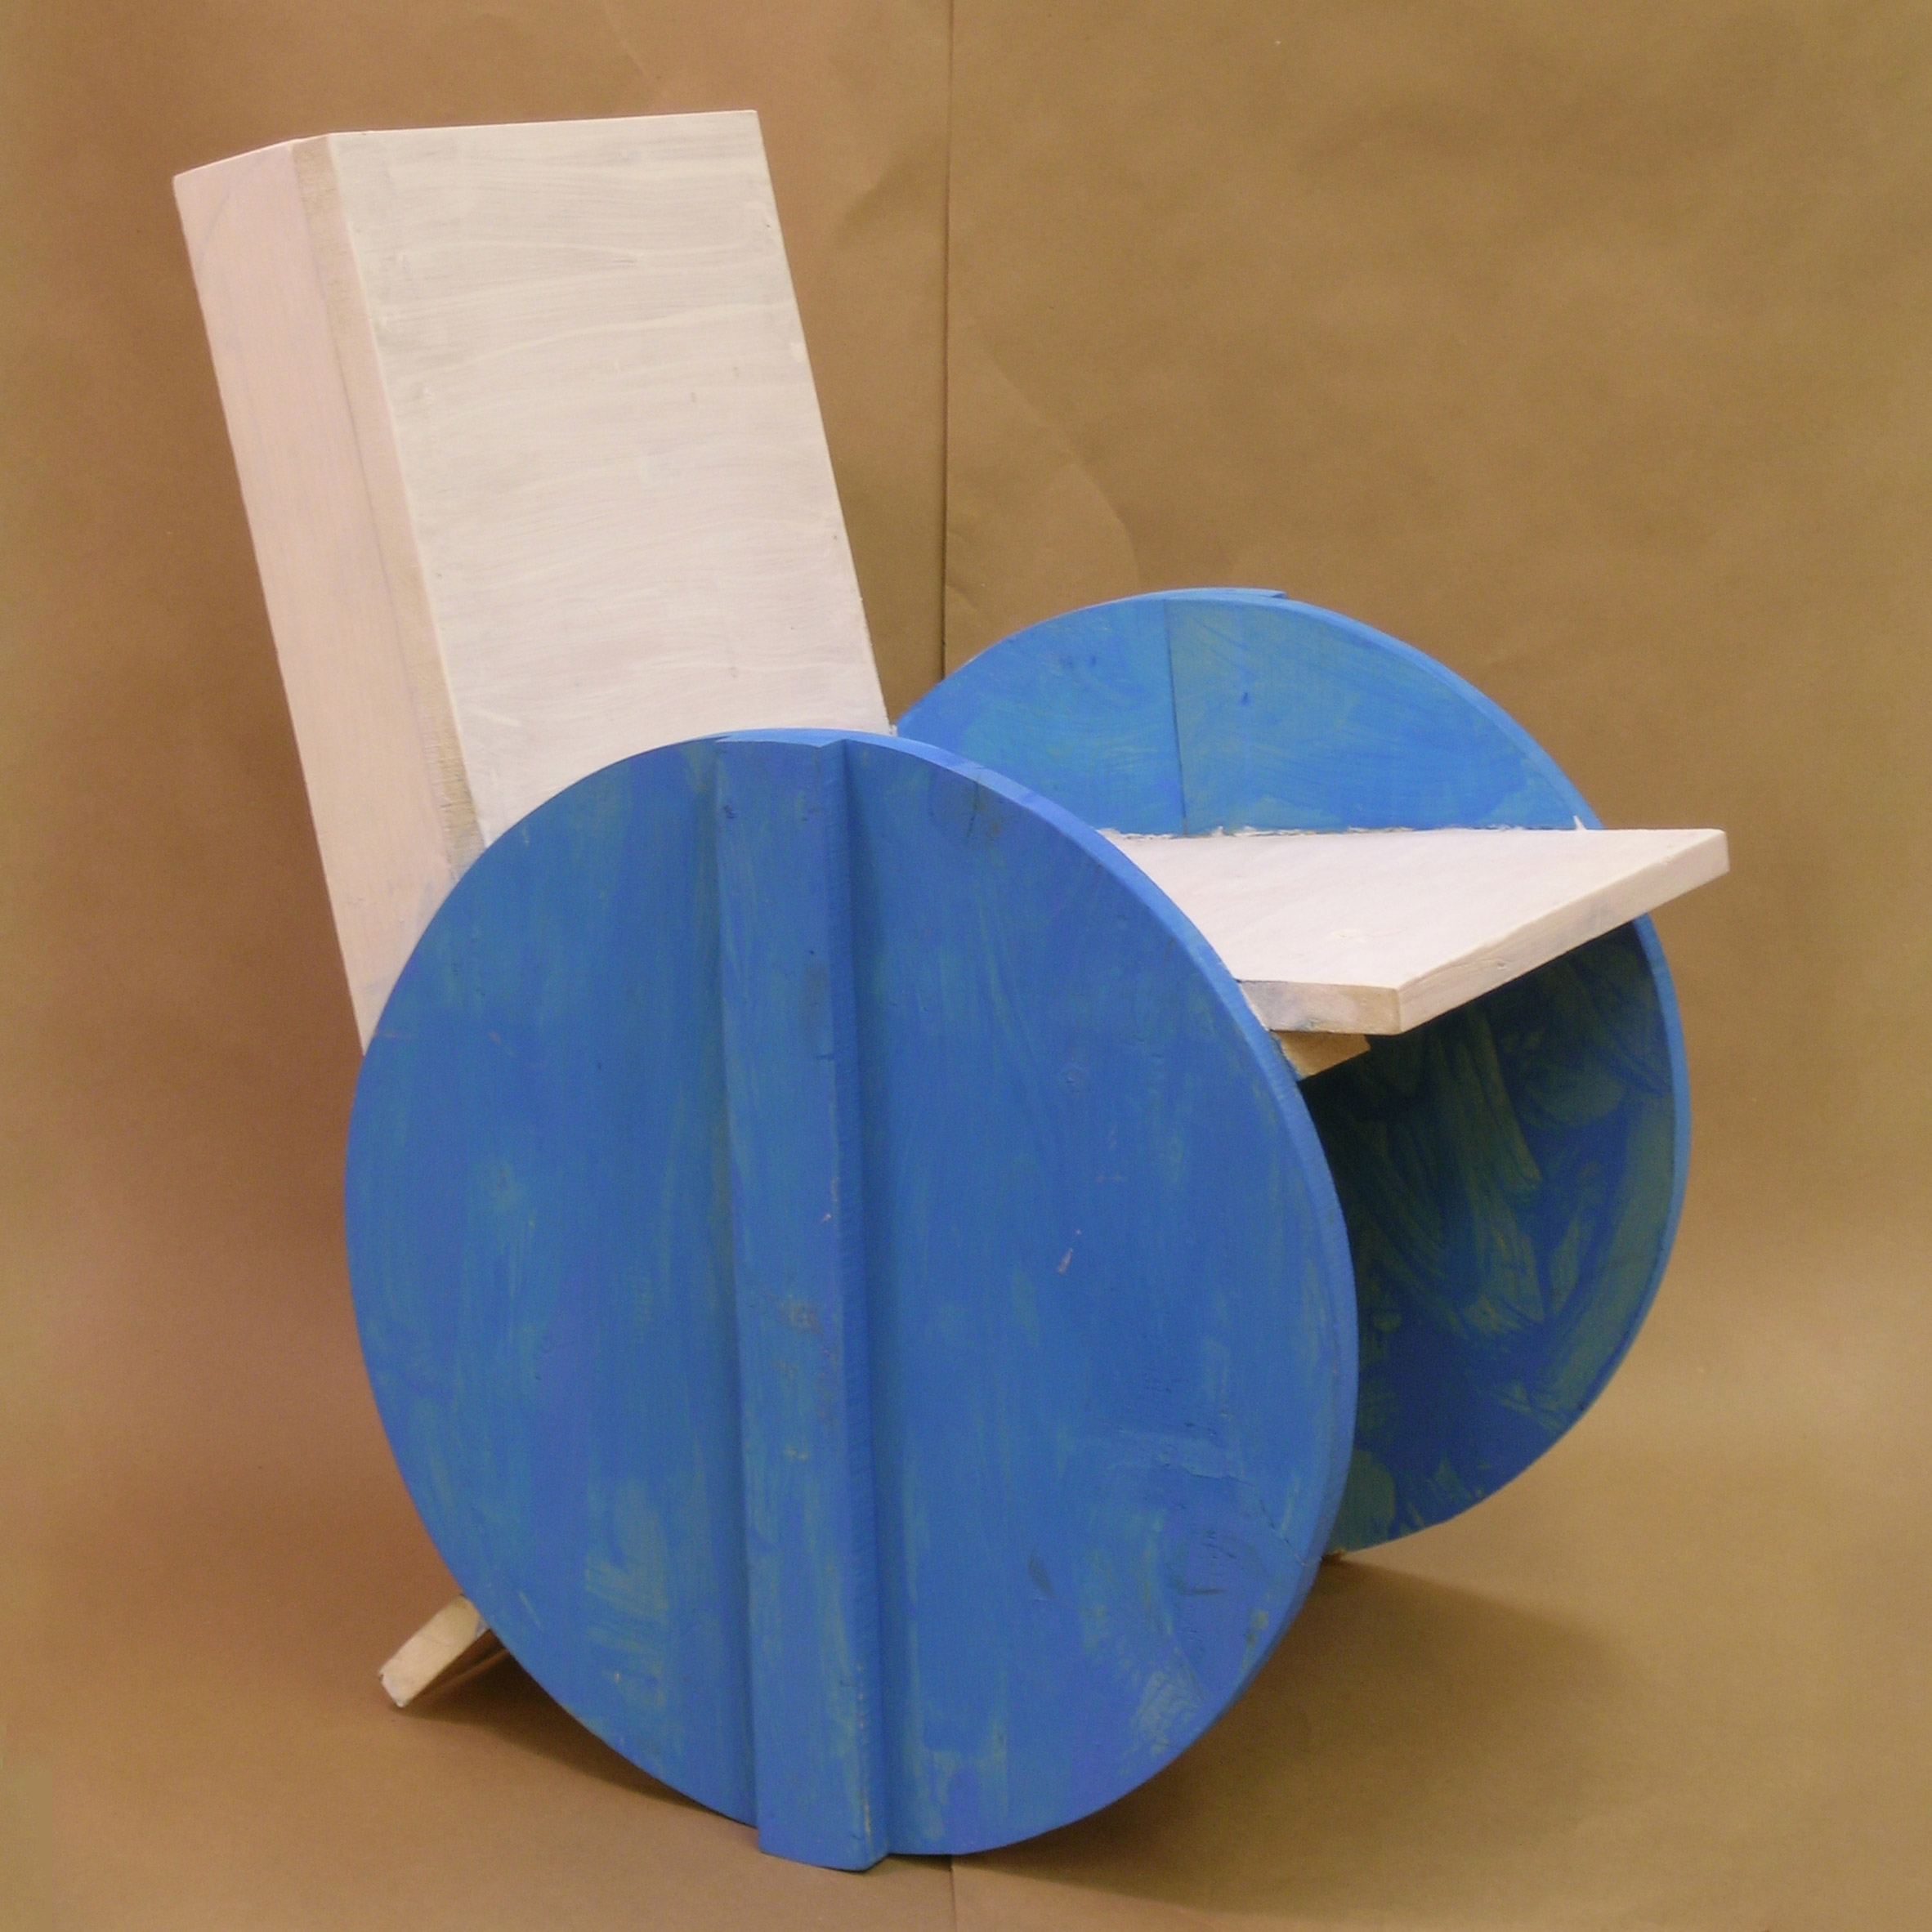 White chair with circular blue side panels from Grade Three Chairs project by Bruce Edelstein at Trinity School